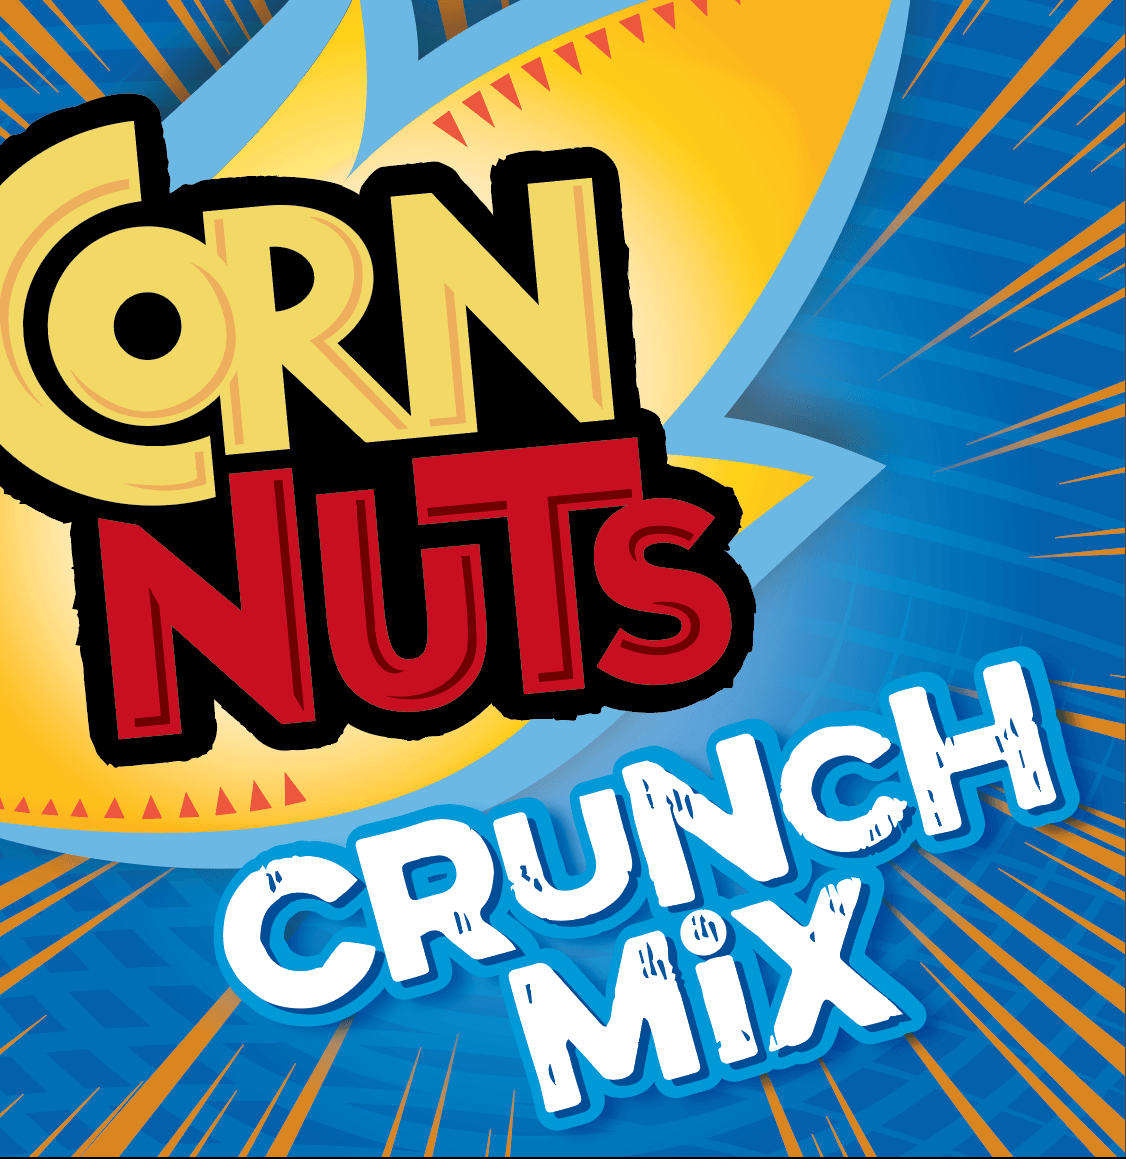 corn nuts package design